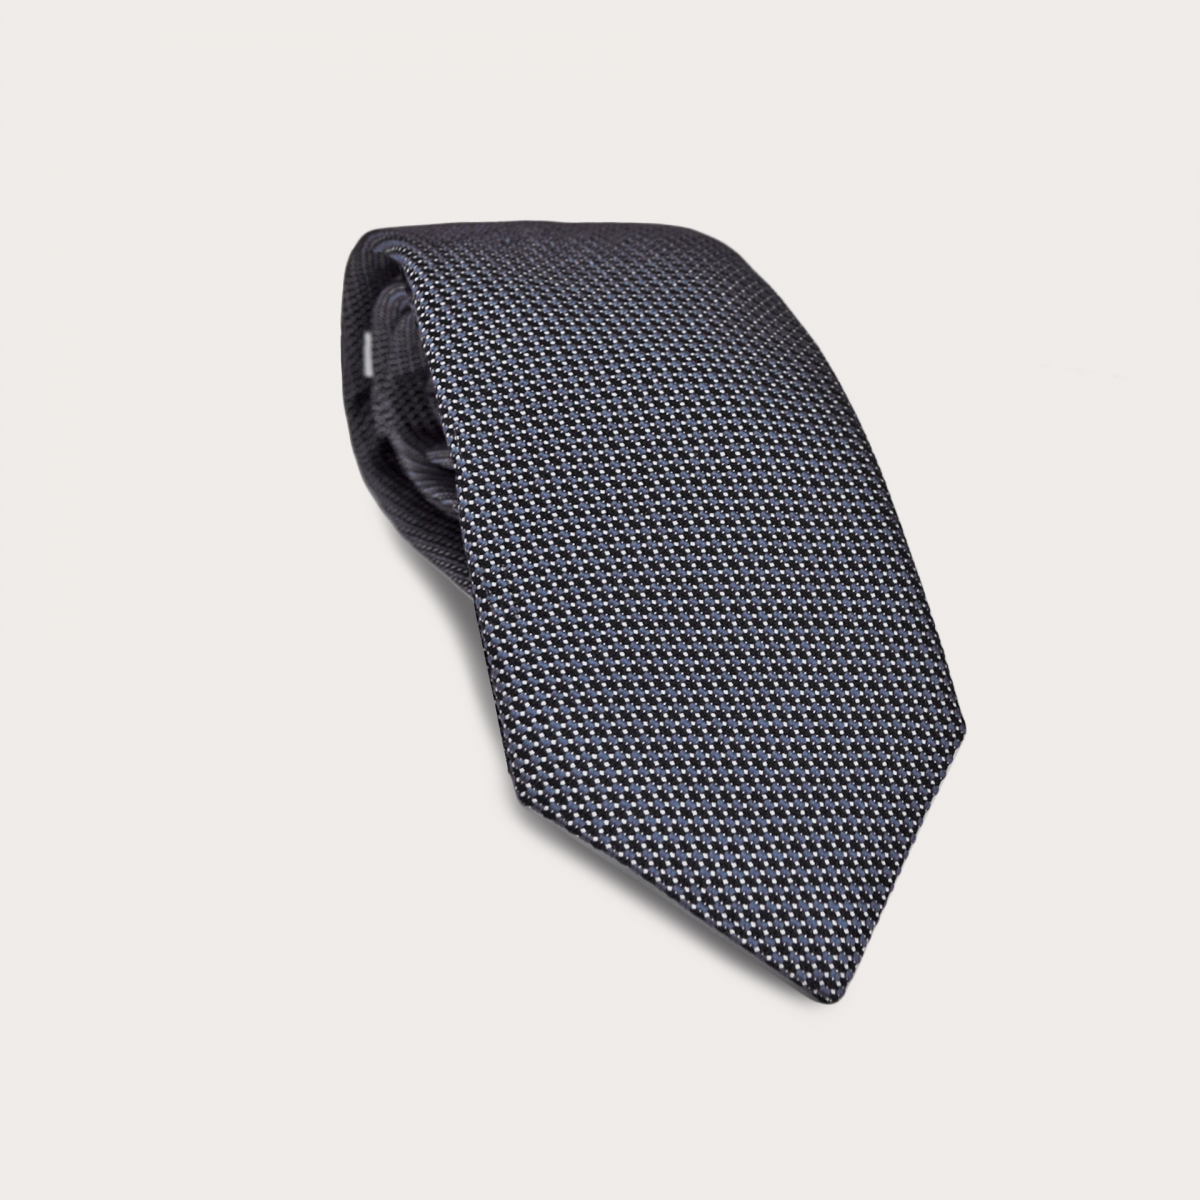 BRUCLE Jacquard silk tie, smoky blue dotted